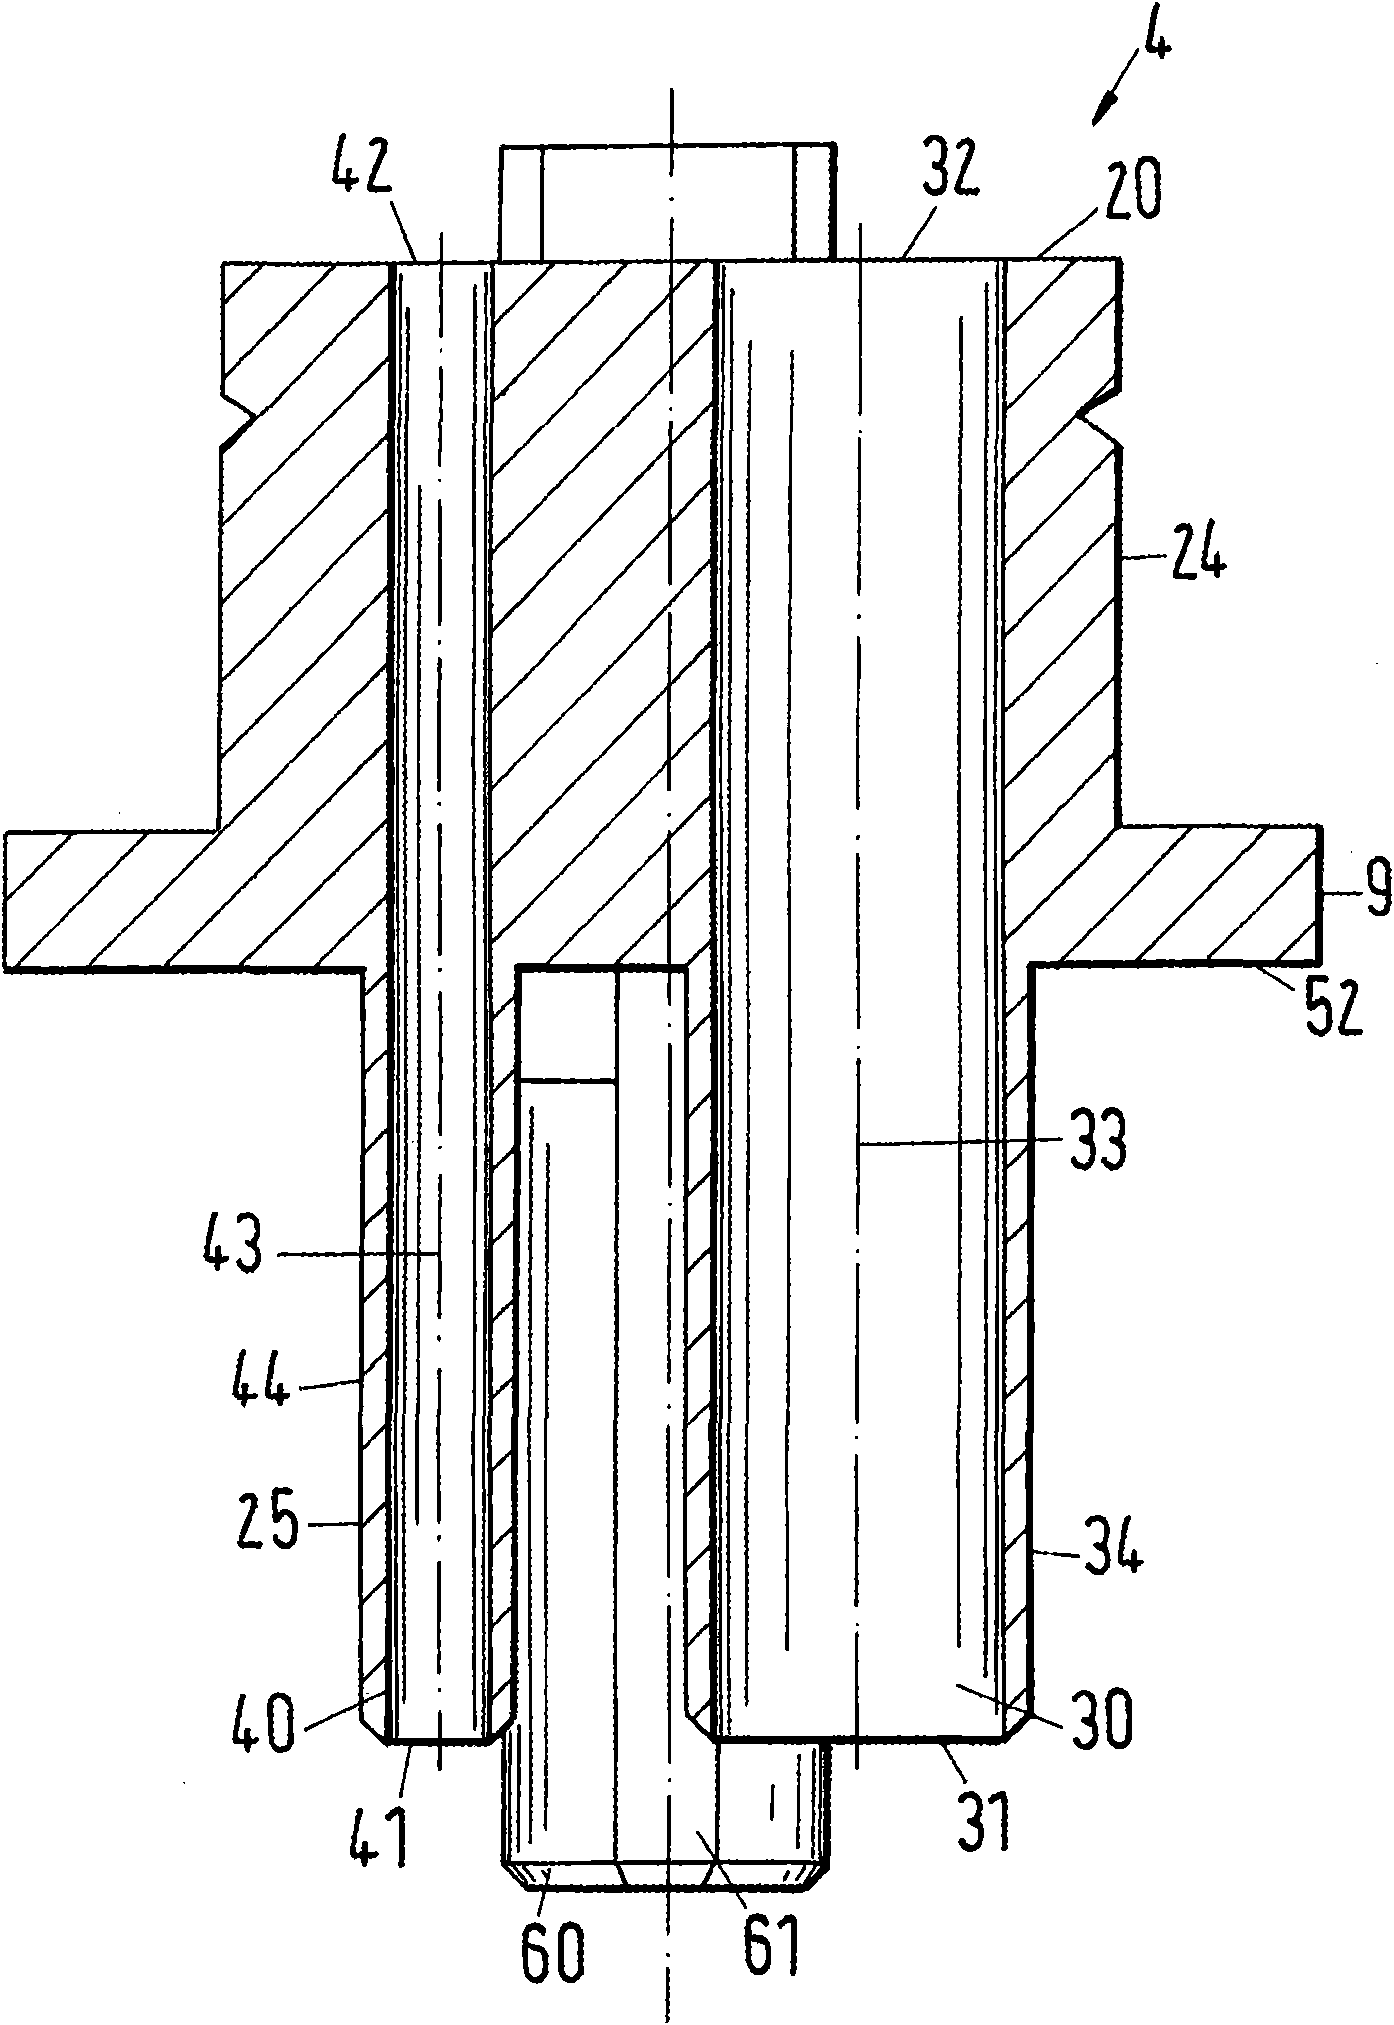 Intermediate piece for the connection of a storage container to a static mixer